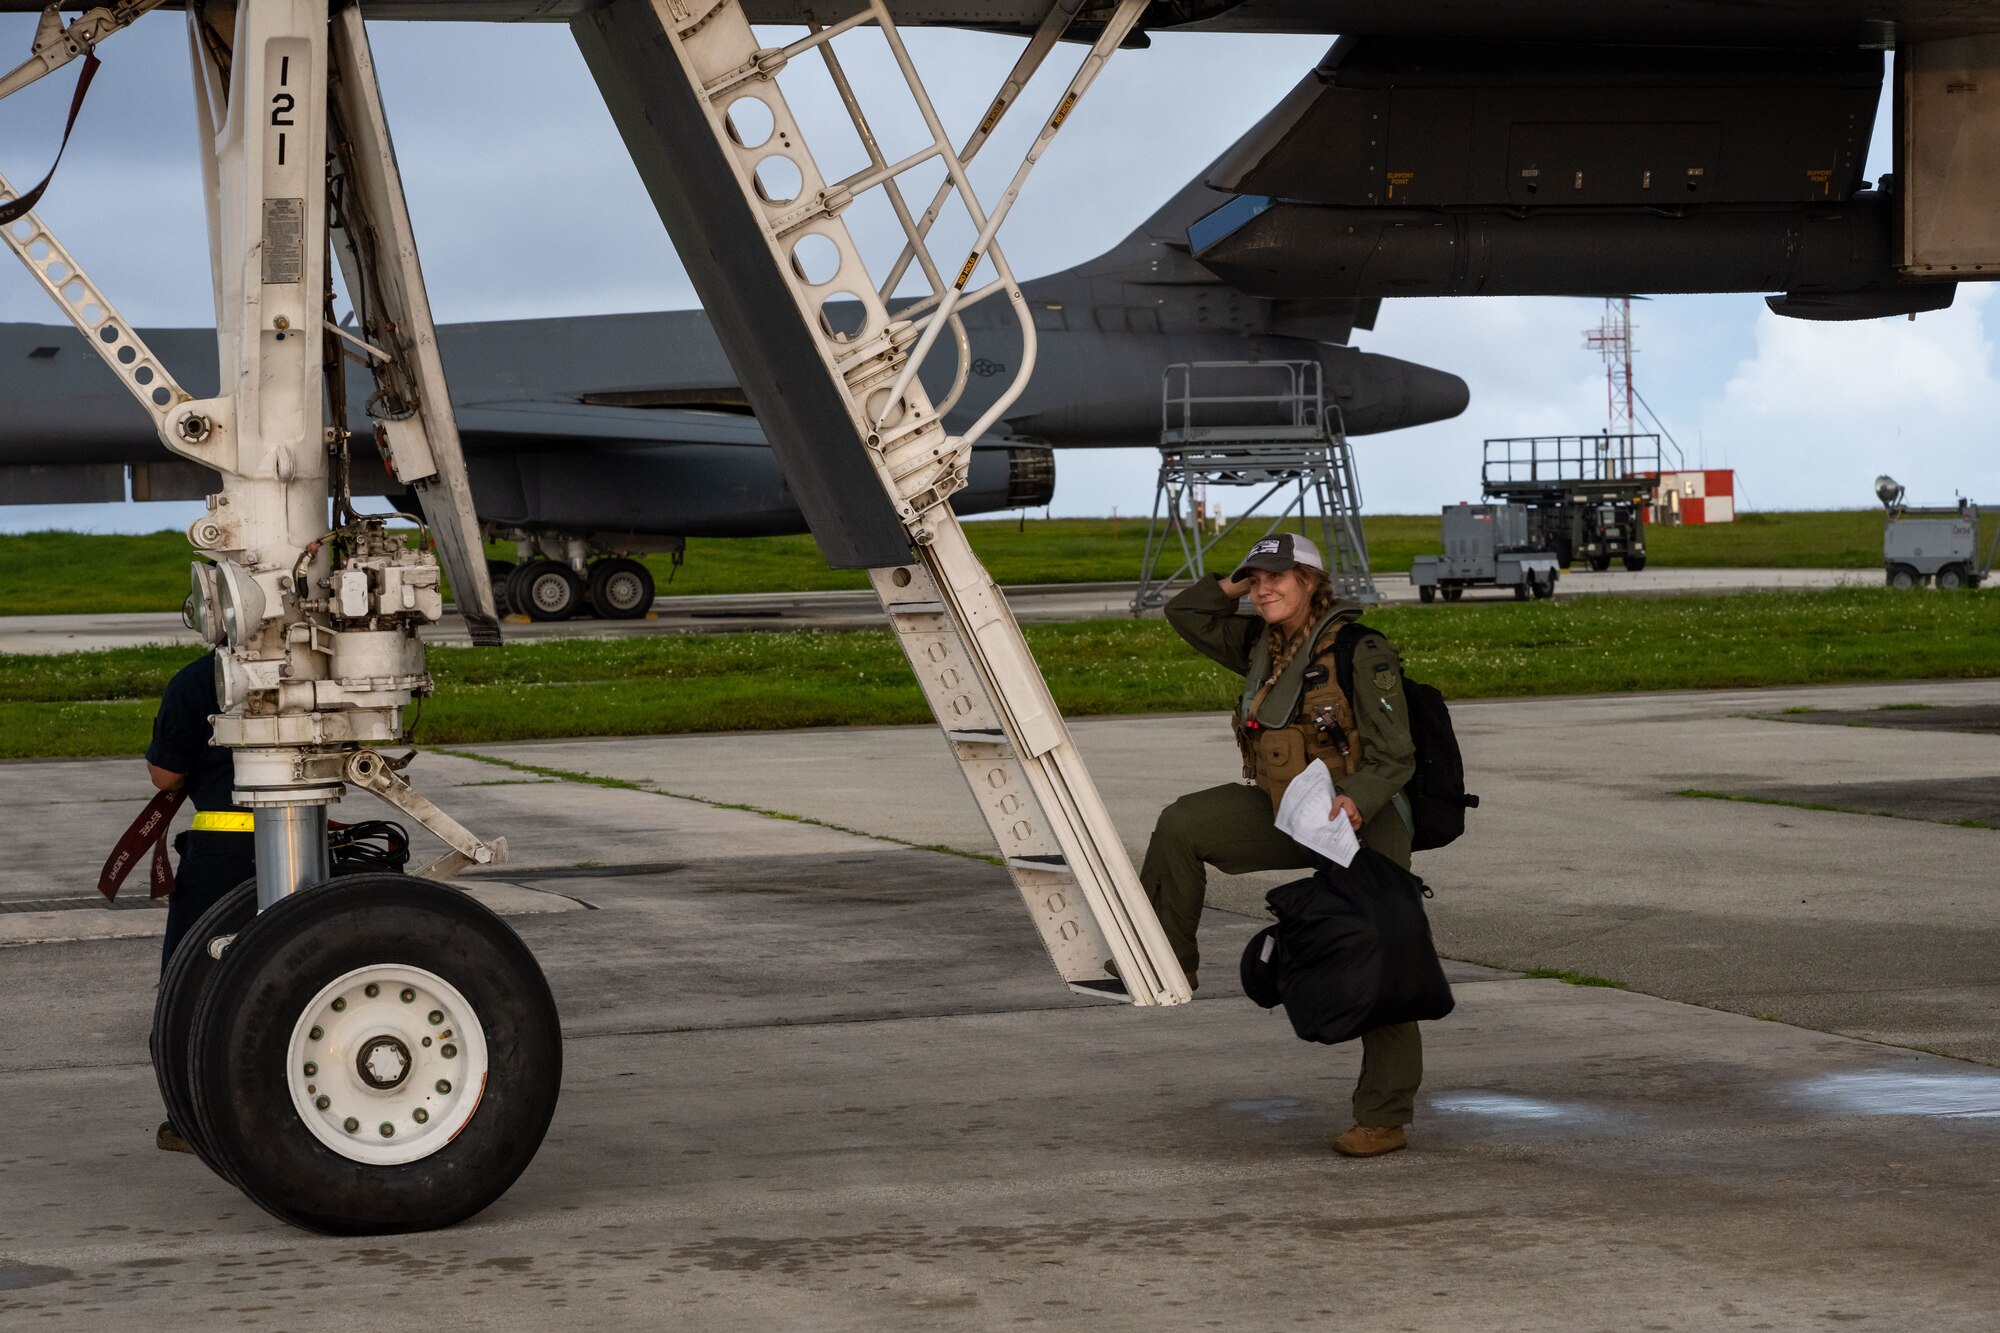 U.S. Air Force Capt. Sarah Brandt, a weapons systems operator with the 28th Bomb Wing at U.S. Air Force Capt. Sarah Brandt, a 37th Expeditionary Bomb Squadron weapons systems operator assigned to Ellsworth Air Force Base, South Dakota, exits a B-1B Lancer at Andersen Air Force Base, Guam, Oct. 19, 2022. The United States promotes freedom of navigation and other internationally lawful uses of the sea and international airspace. (U.S. Air Force photo by Airman 1st Class Adam Olson)